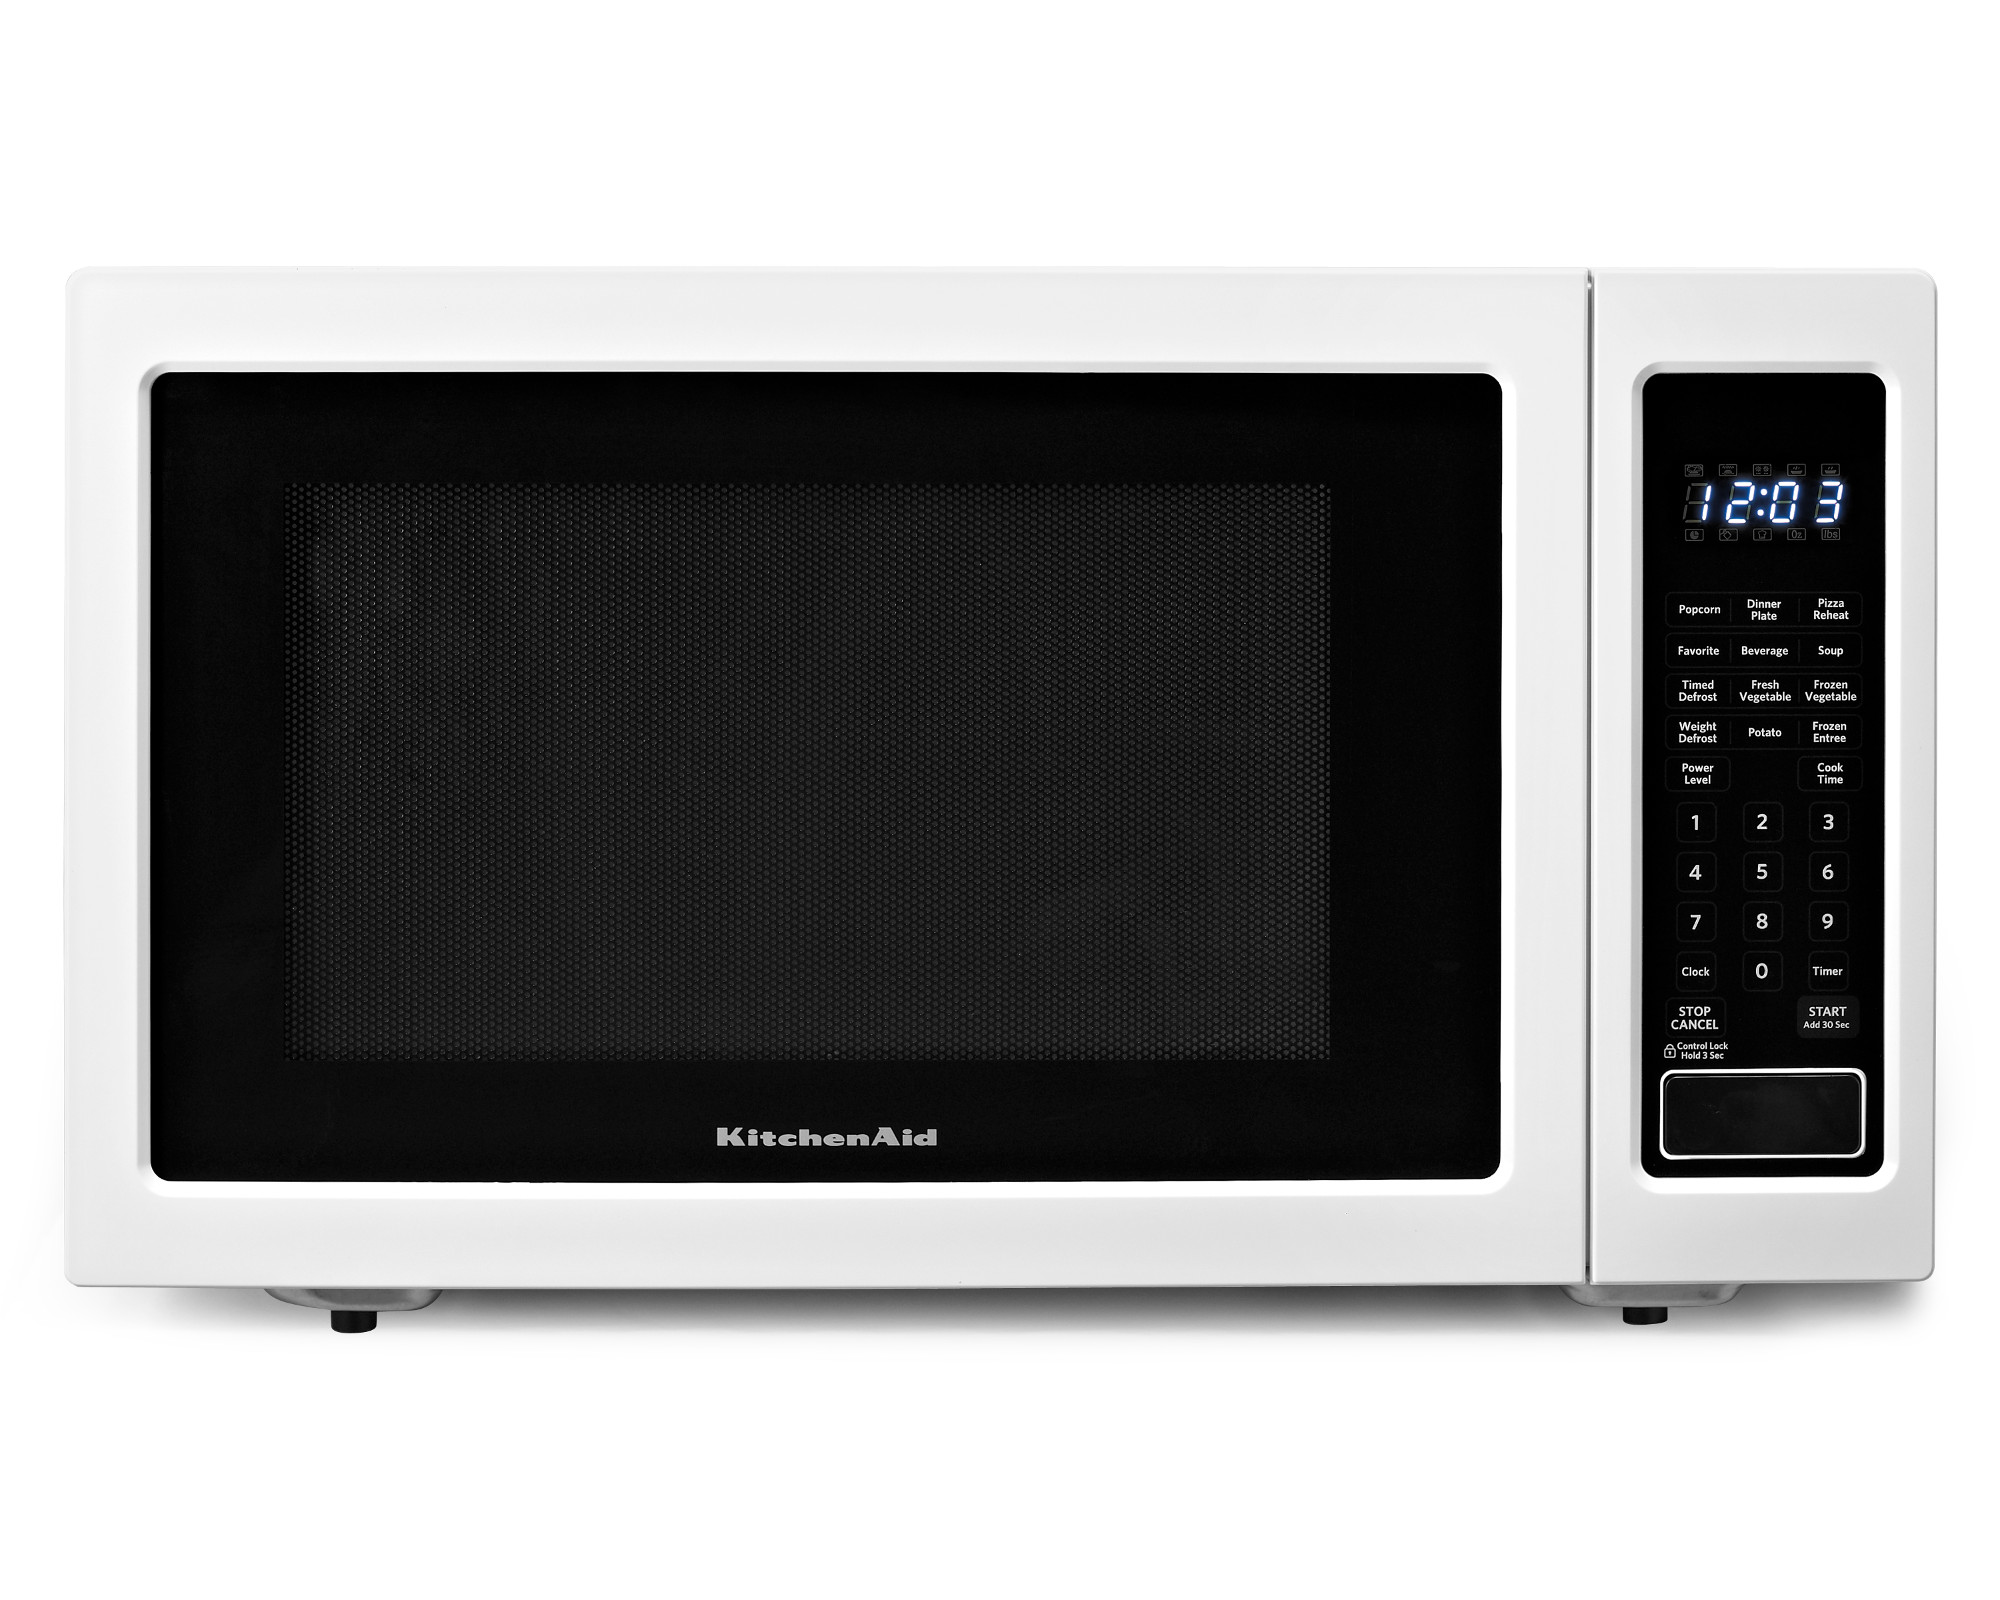 KitchenAid KCMS1655BWH 1.6 cu. ft. 1,200W Countertop Microwave Oven - White